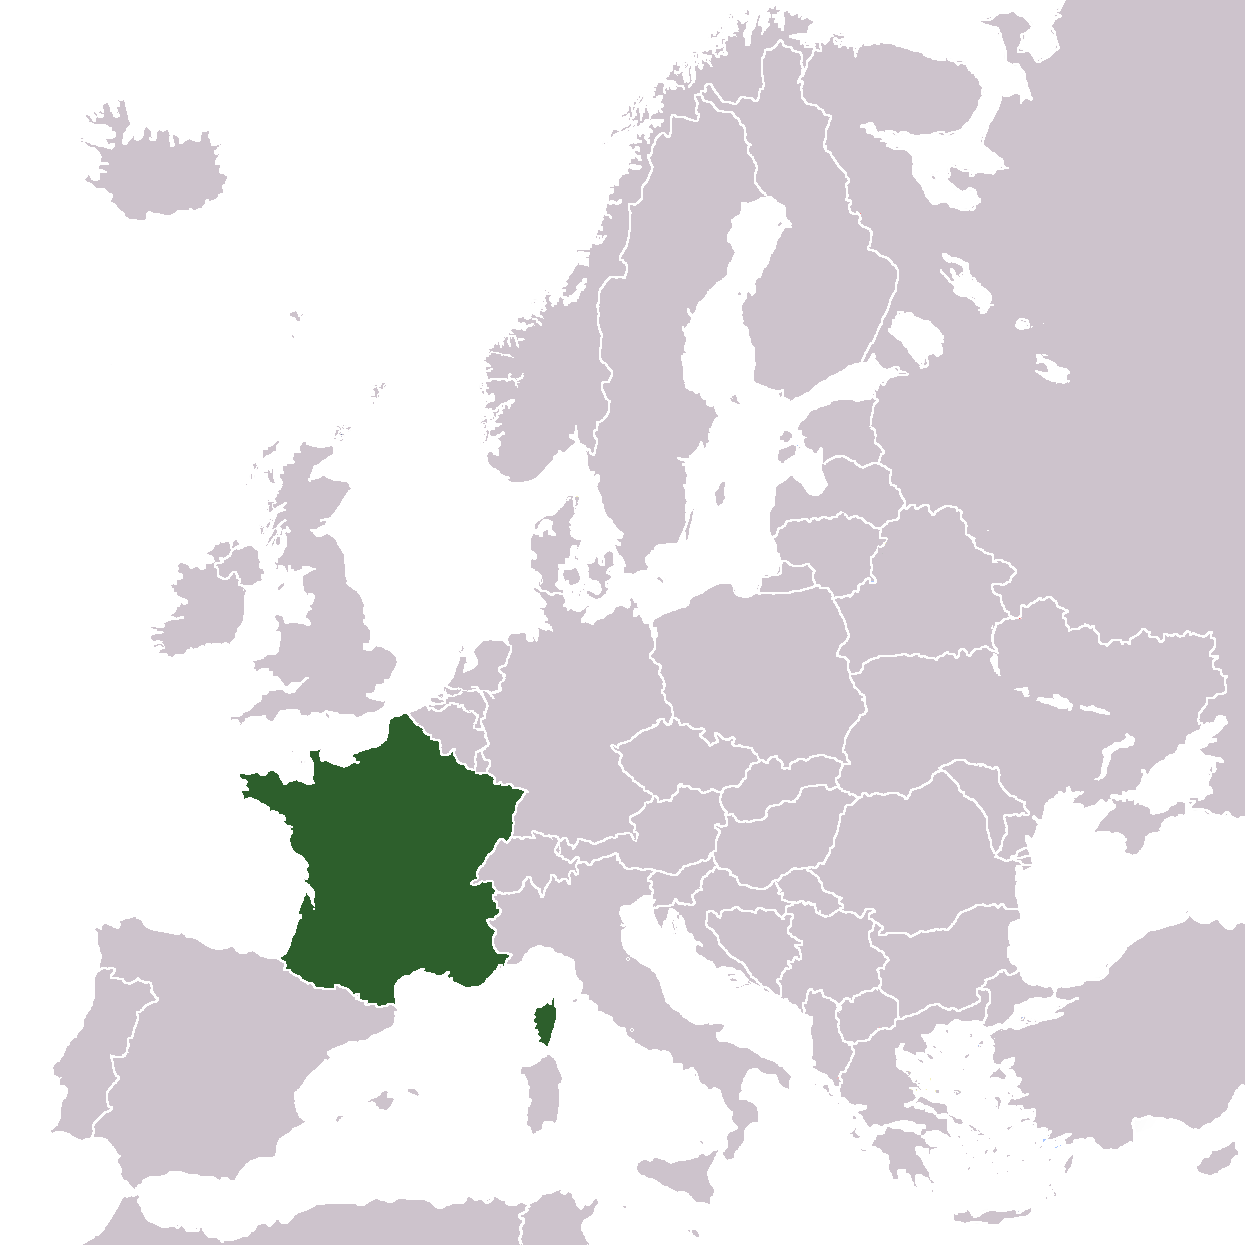 France On Europe Map France Europe Monde Maps Lessons - vrogue.co